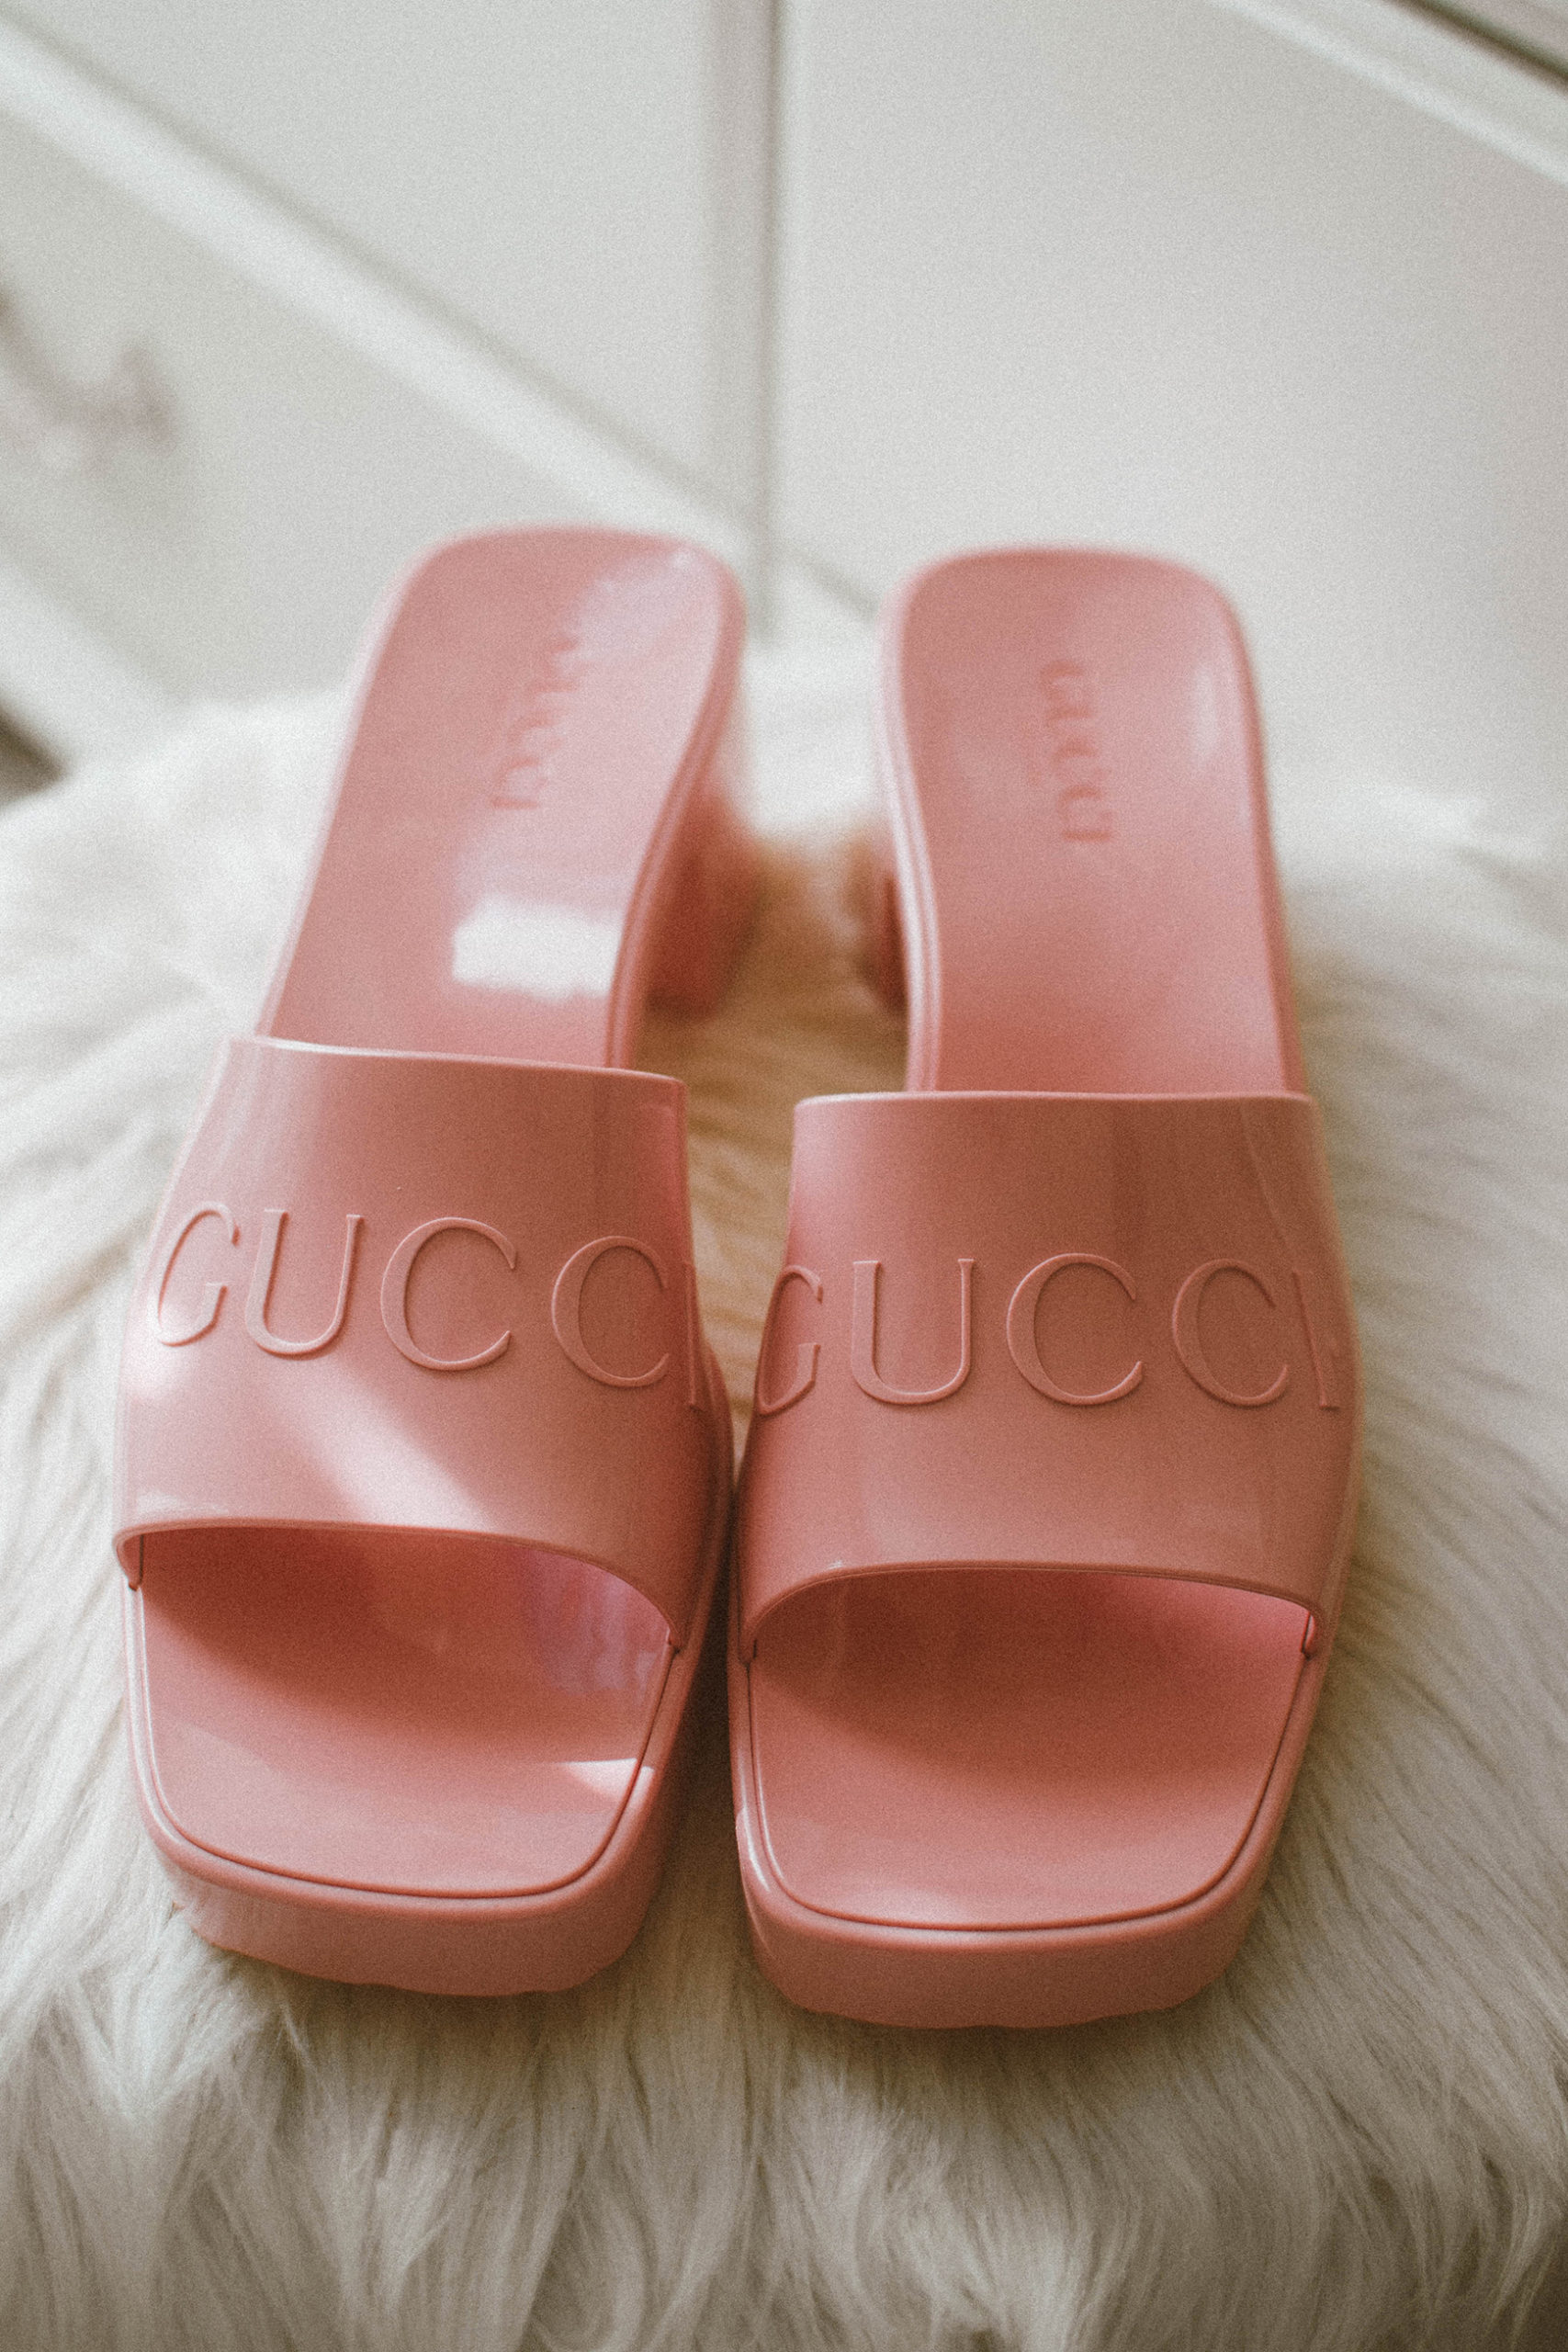 Gucci Pink Rubber Slide Sandal Review From Nubiana, With Love